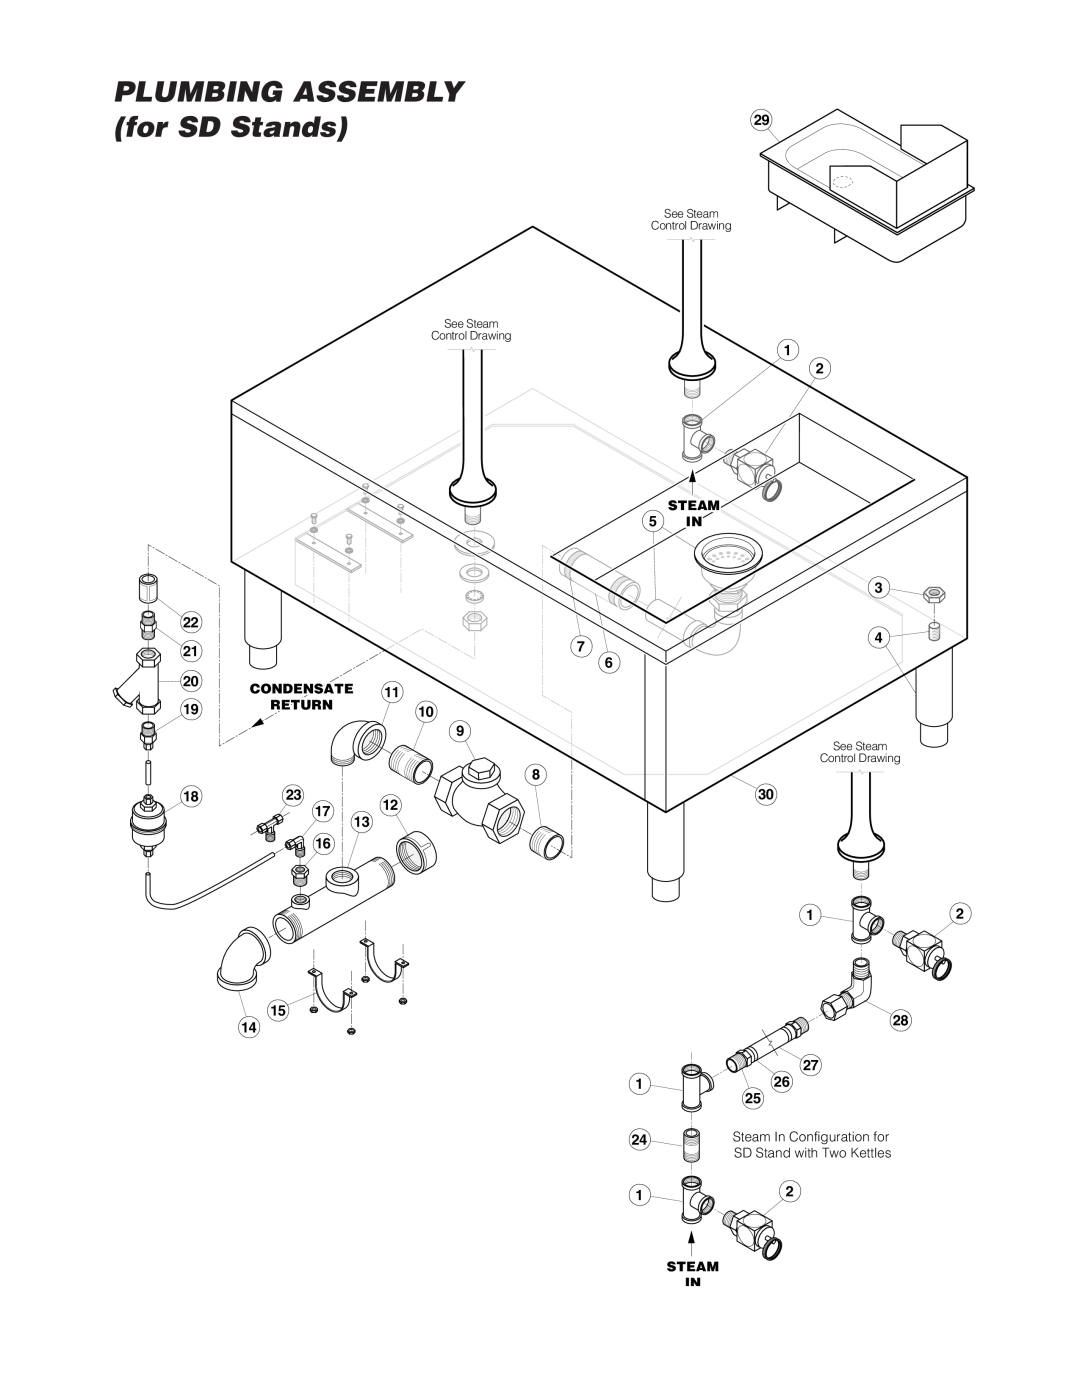 Cleveland Range SD-1600-K1212 manual Plumbing Assembly, for SD Stands, 5 IN, Condensate, Return, Steam In, See Steam 